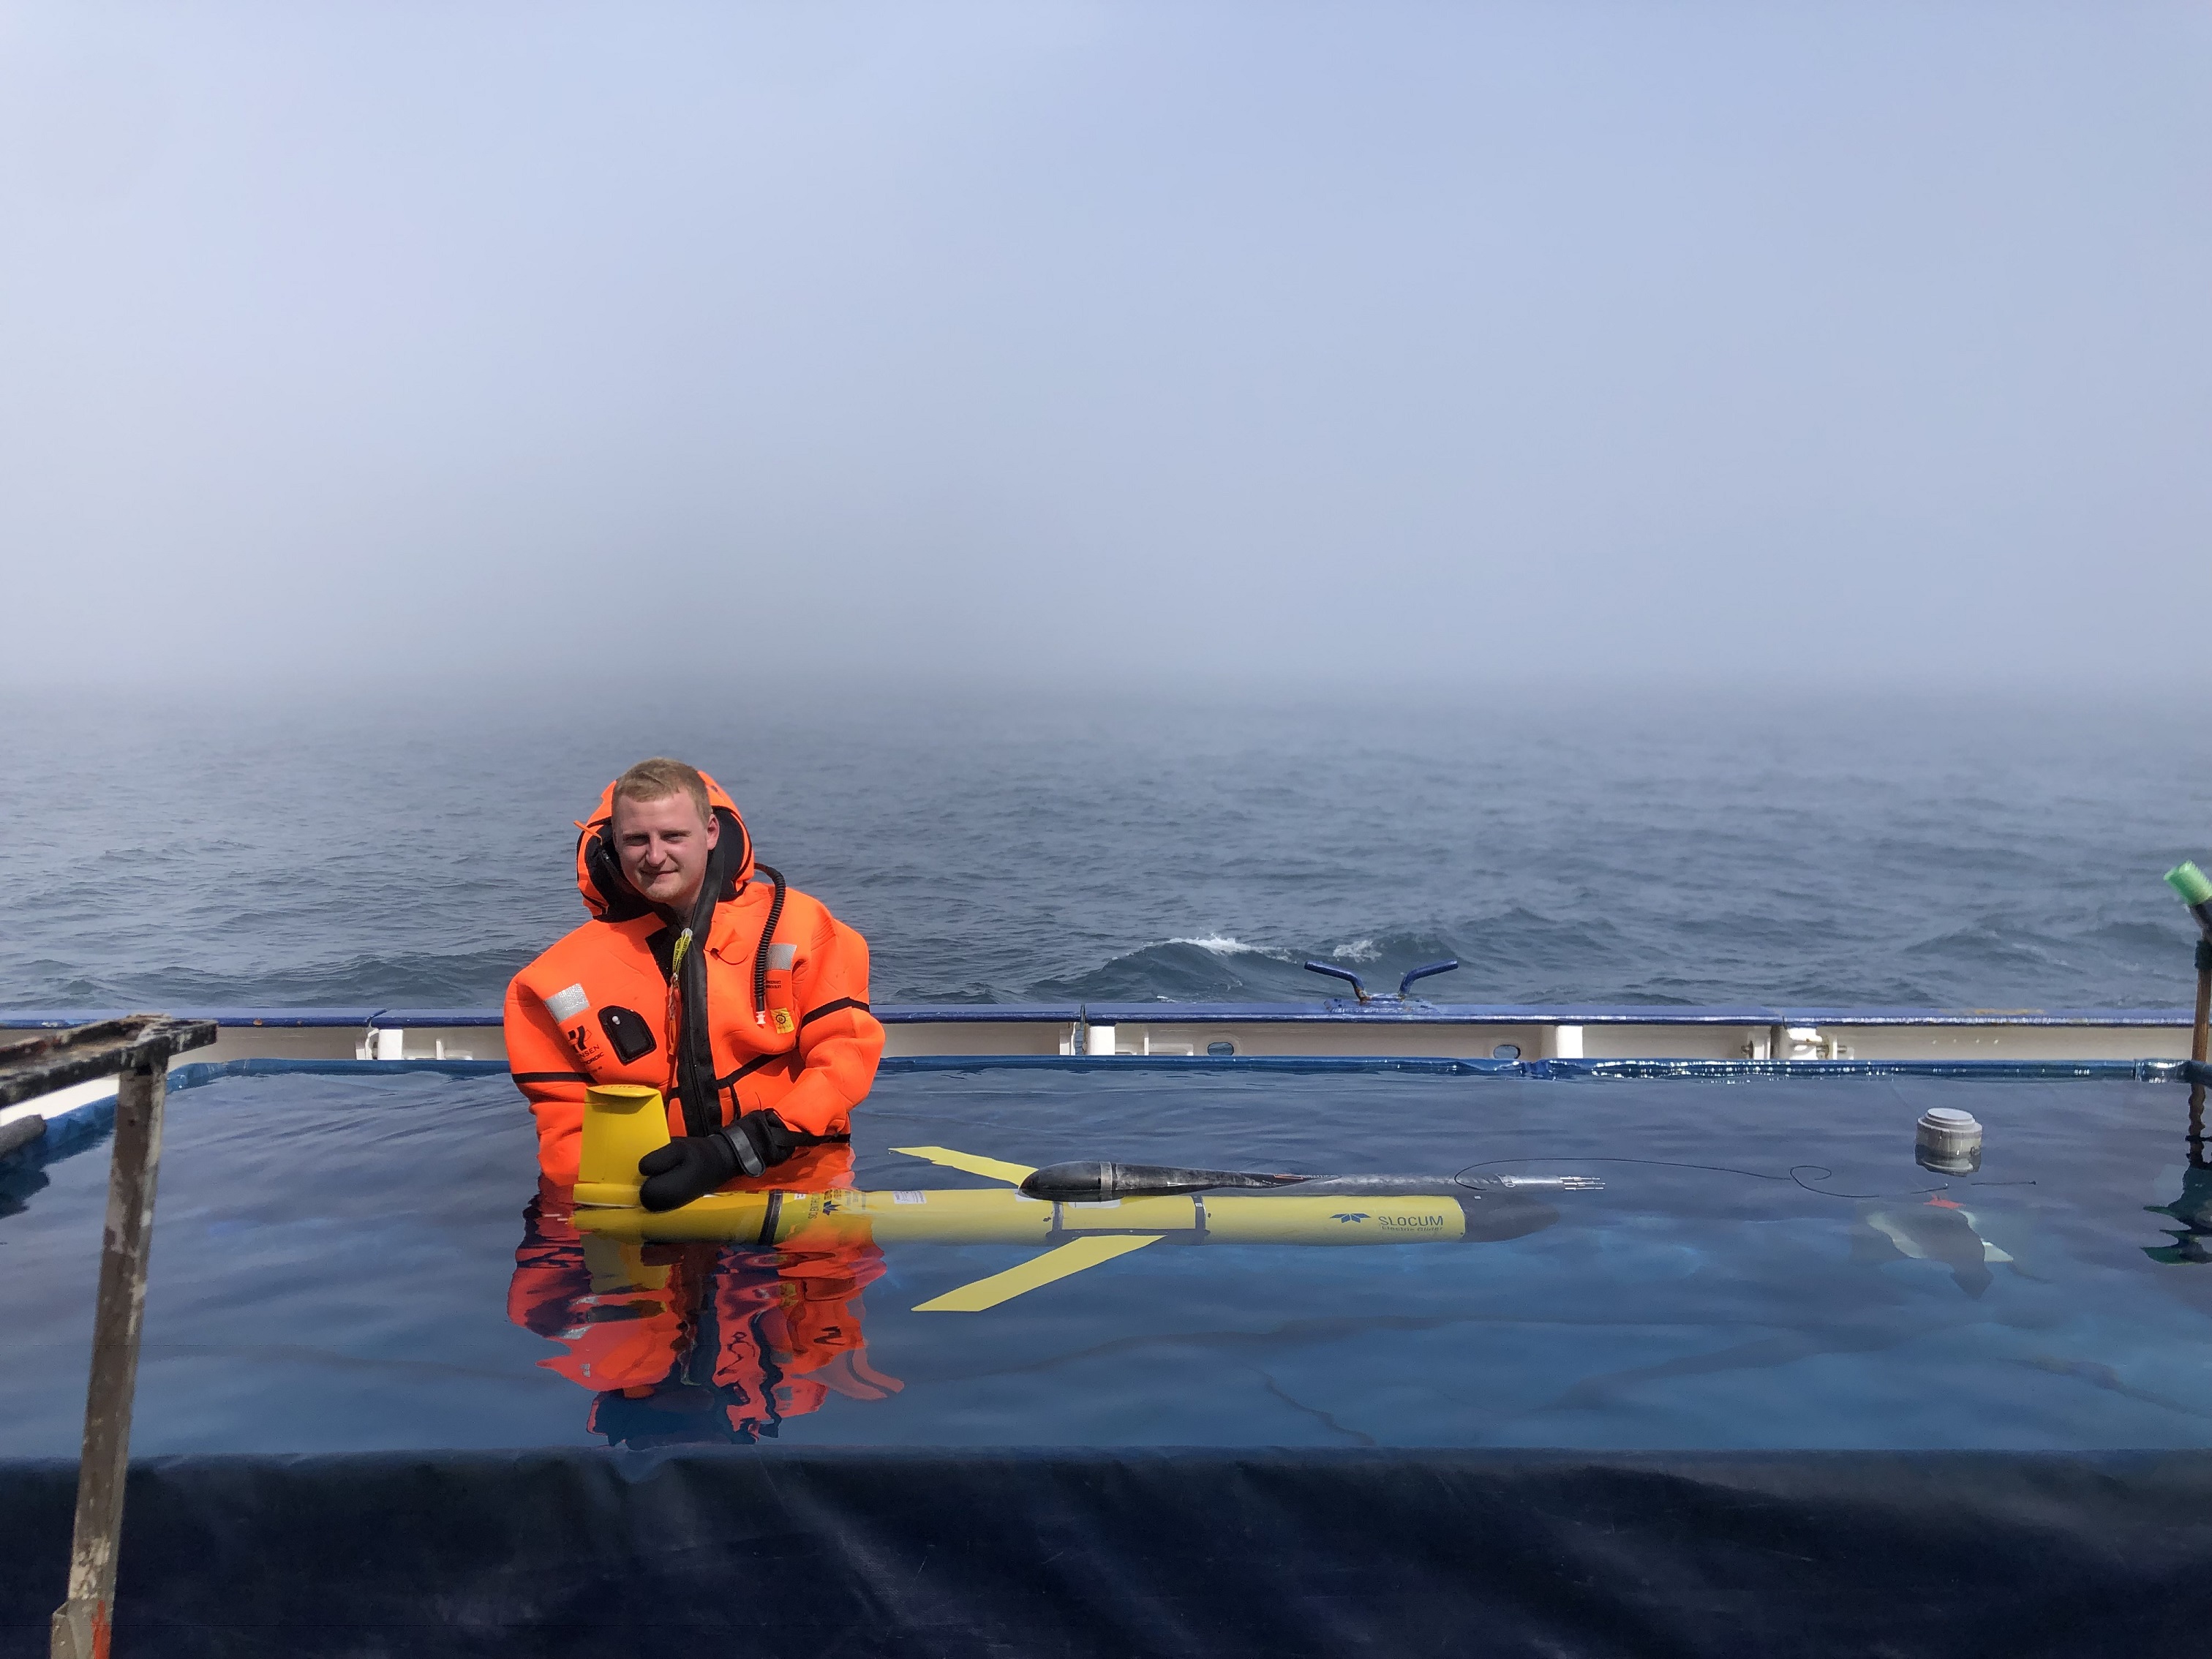 In an aquaphobic combination, Paul Wittig is holding a Glider in the pool installed on the ship deck.